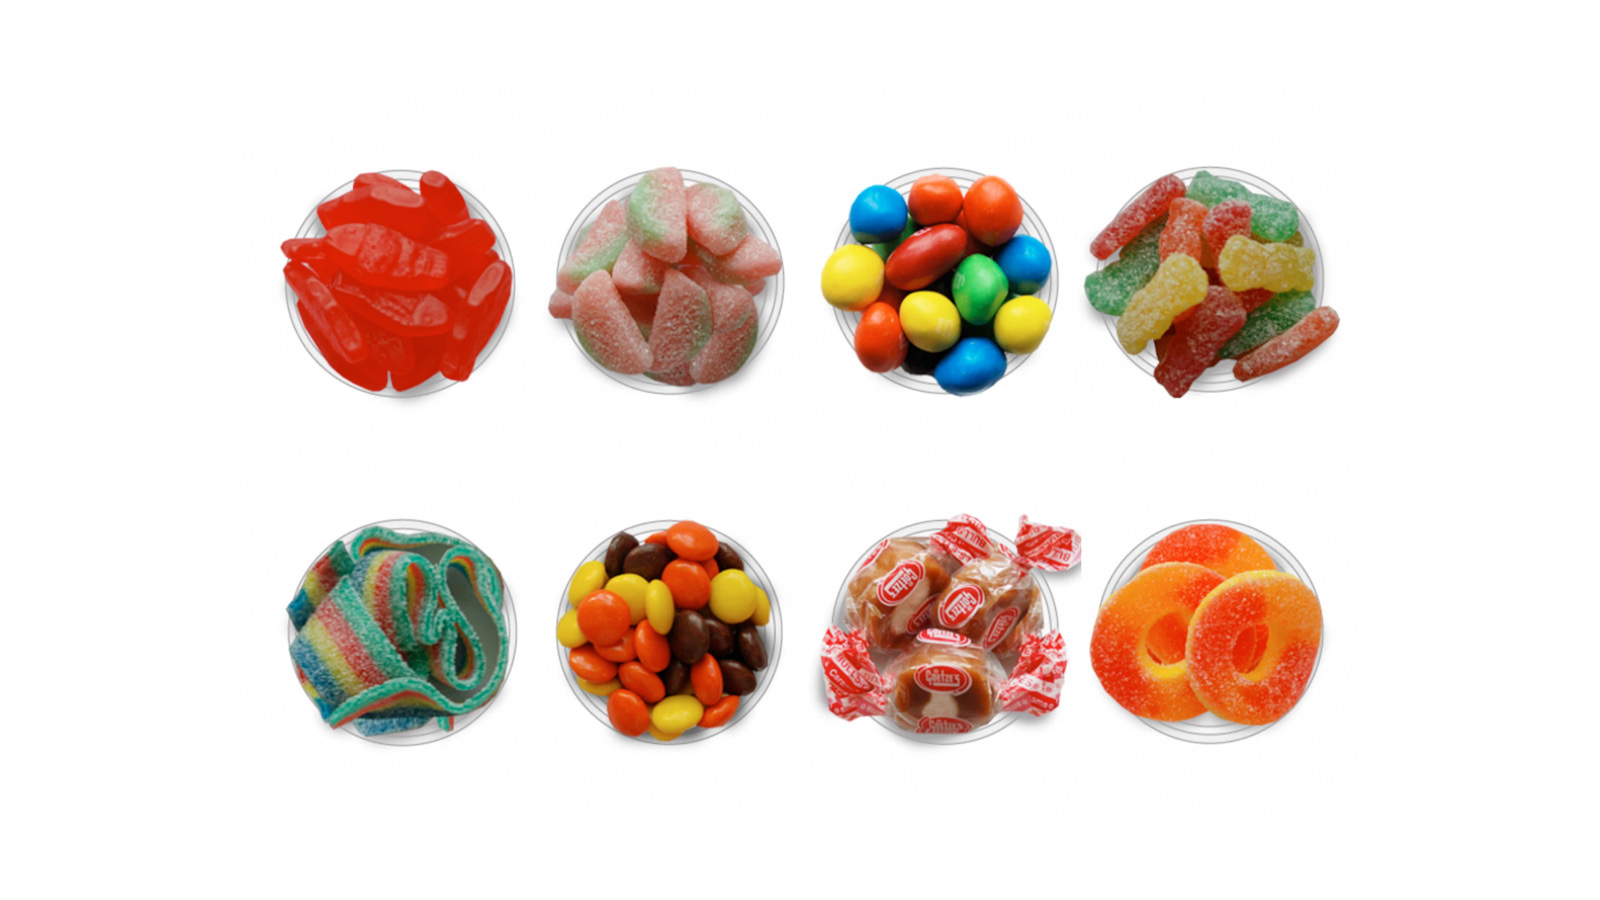 8Great: Fun facts and best selling candies